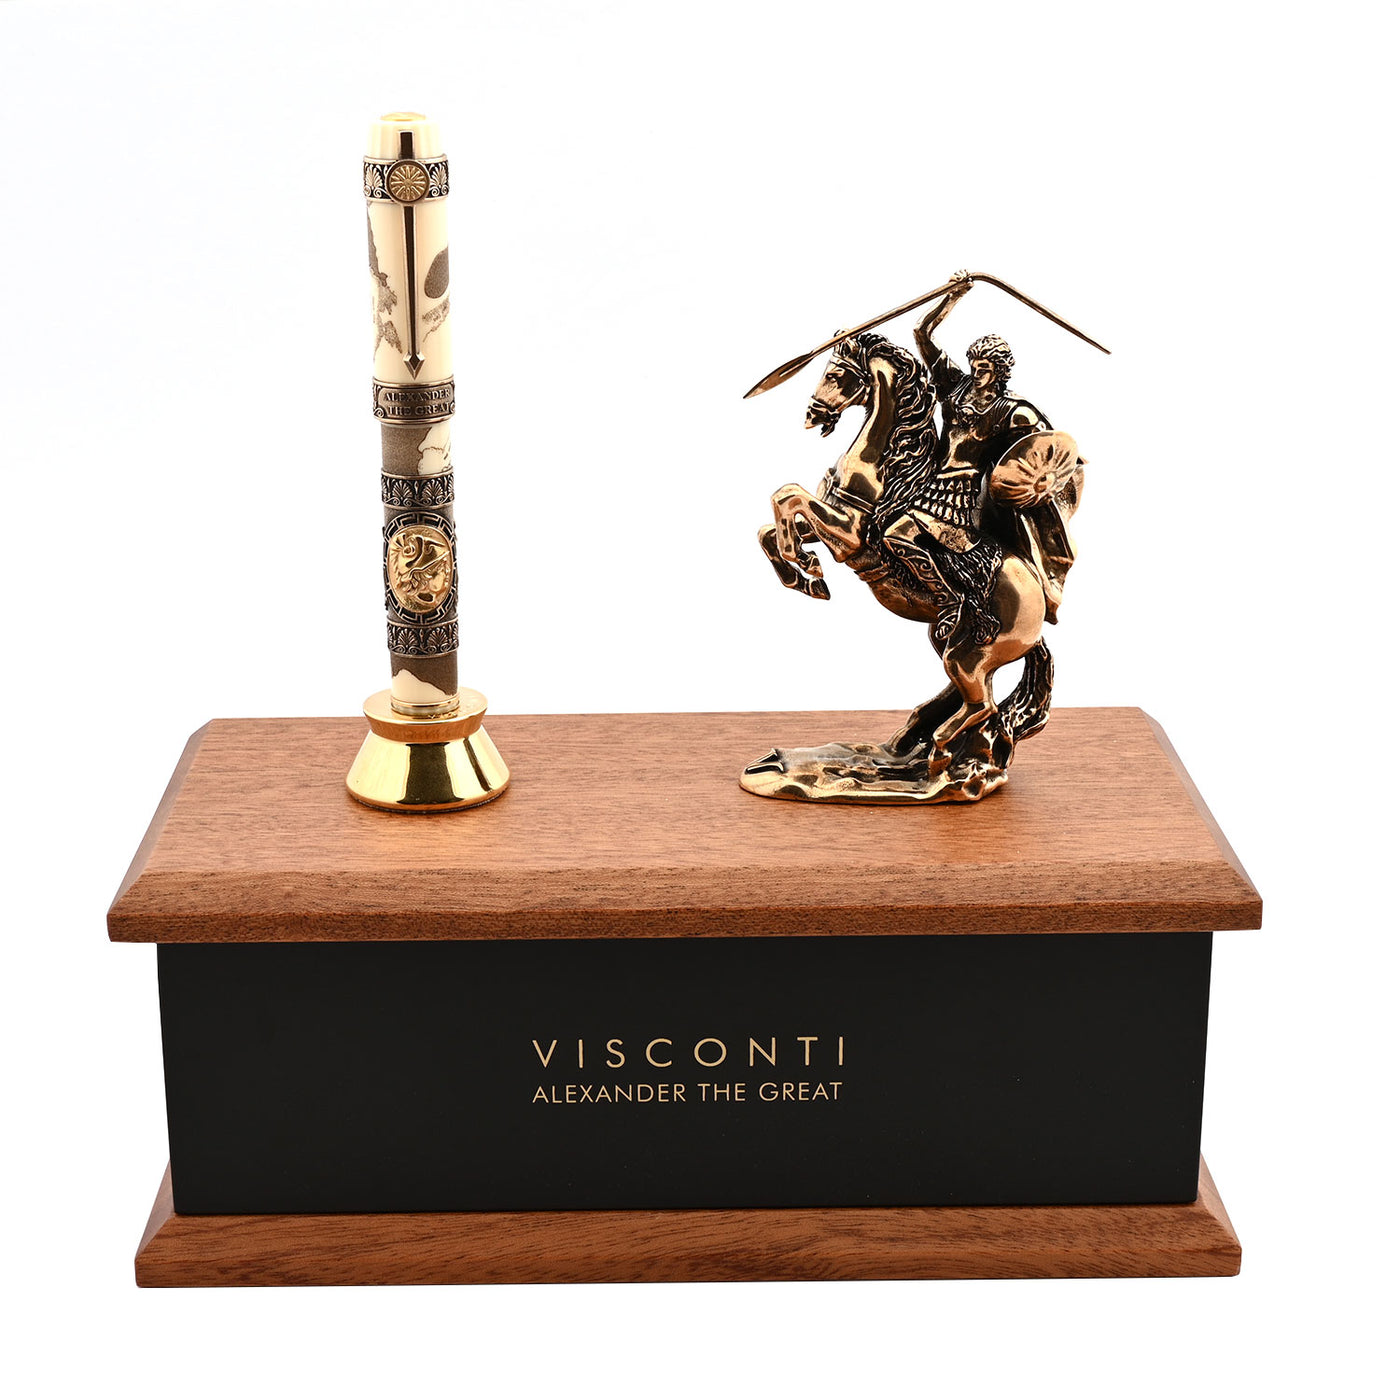 Visconti Alexander the Great Fountain Pen (Limited Edition) 6